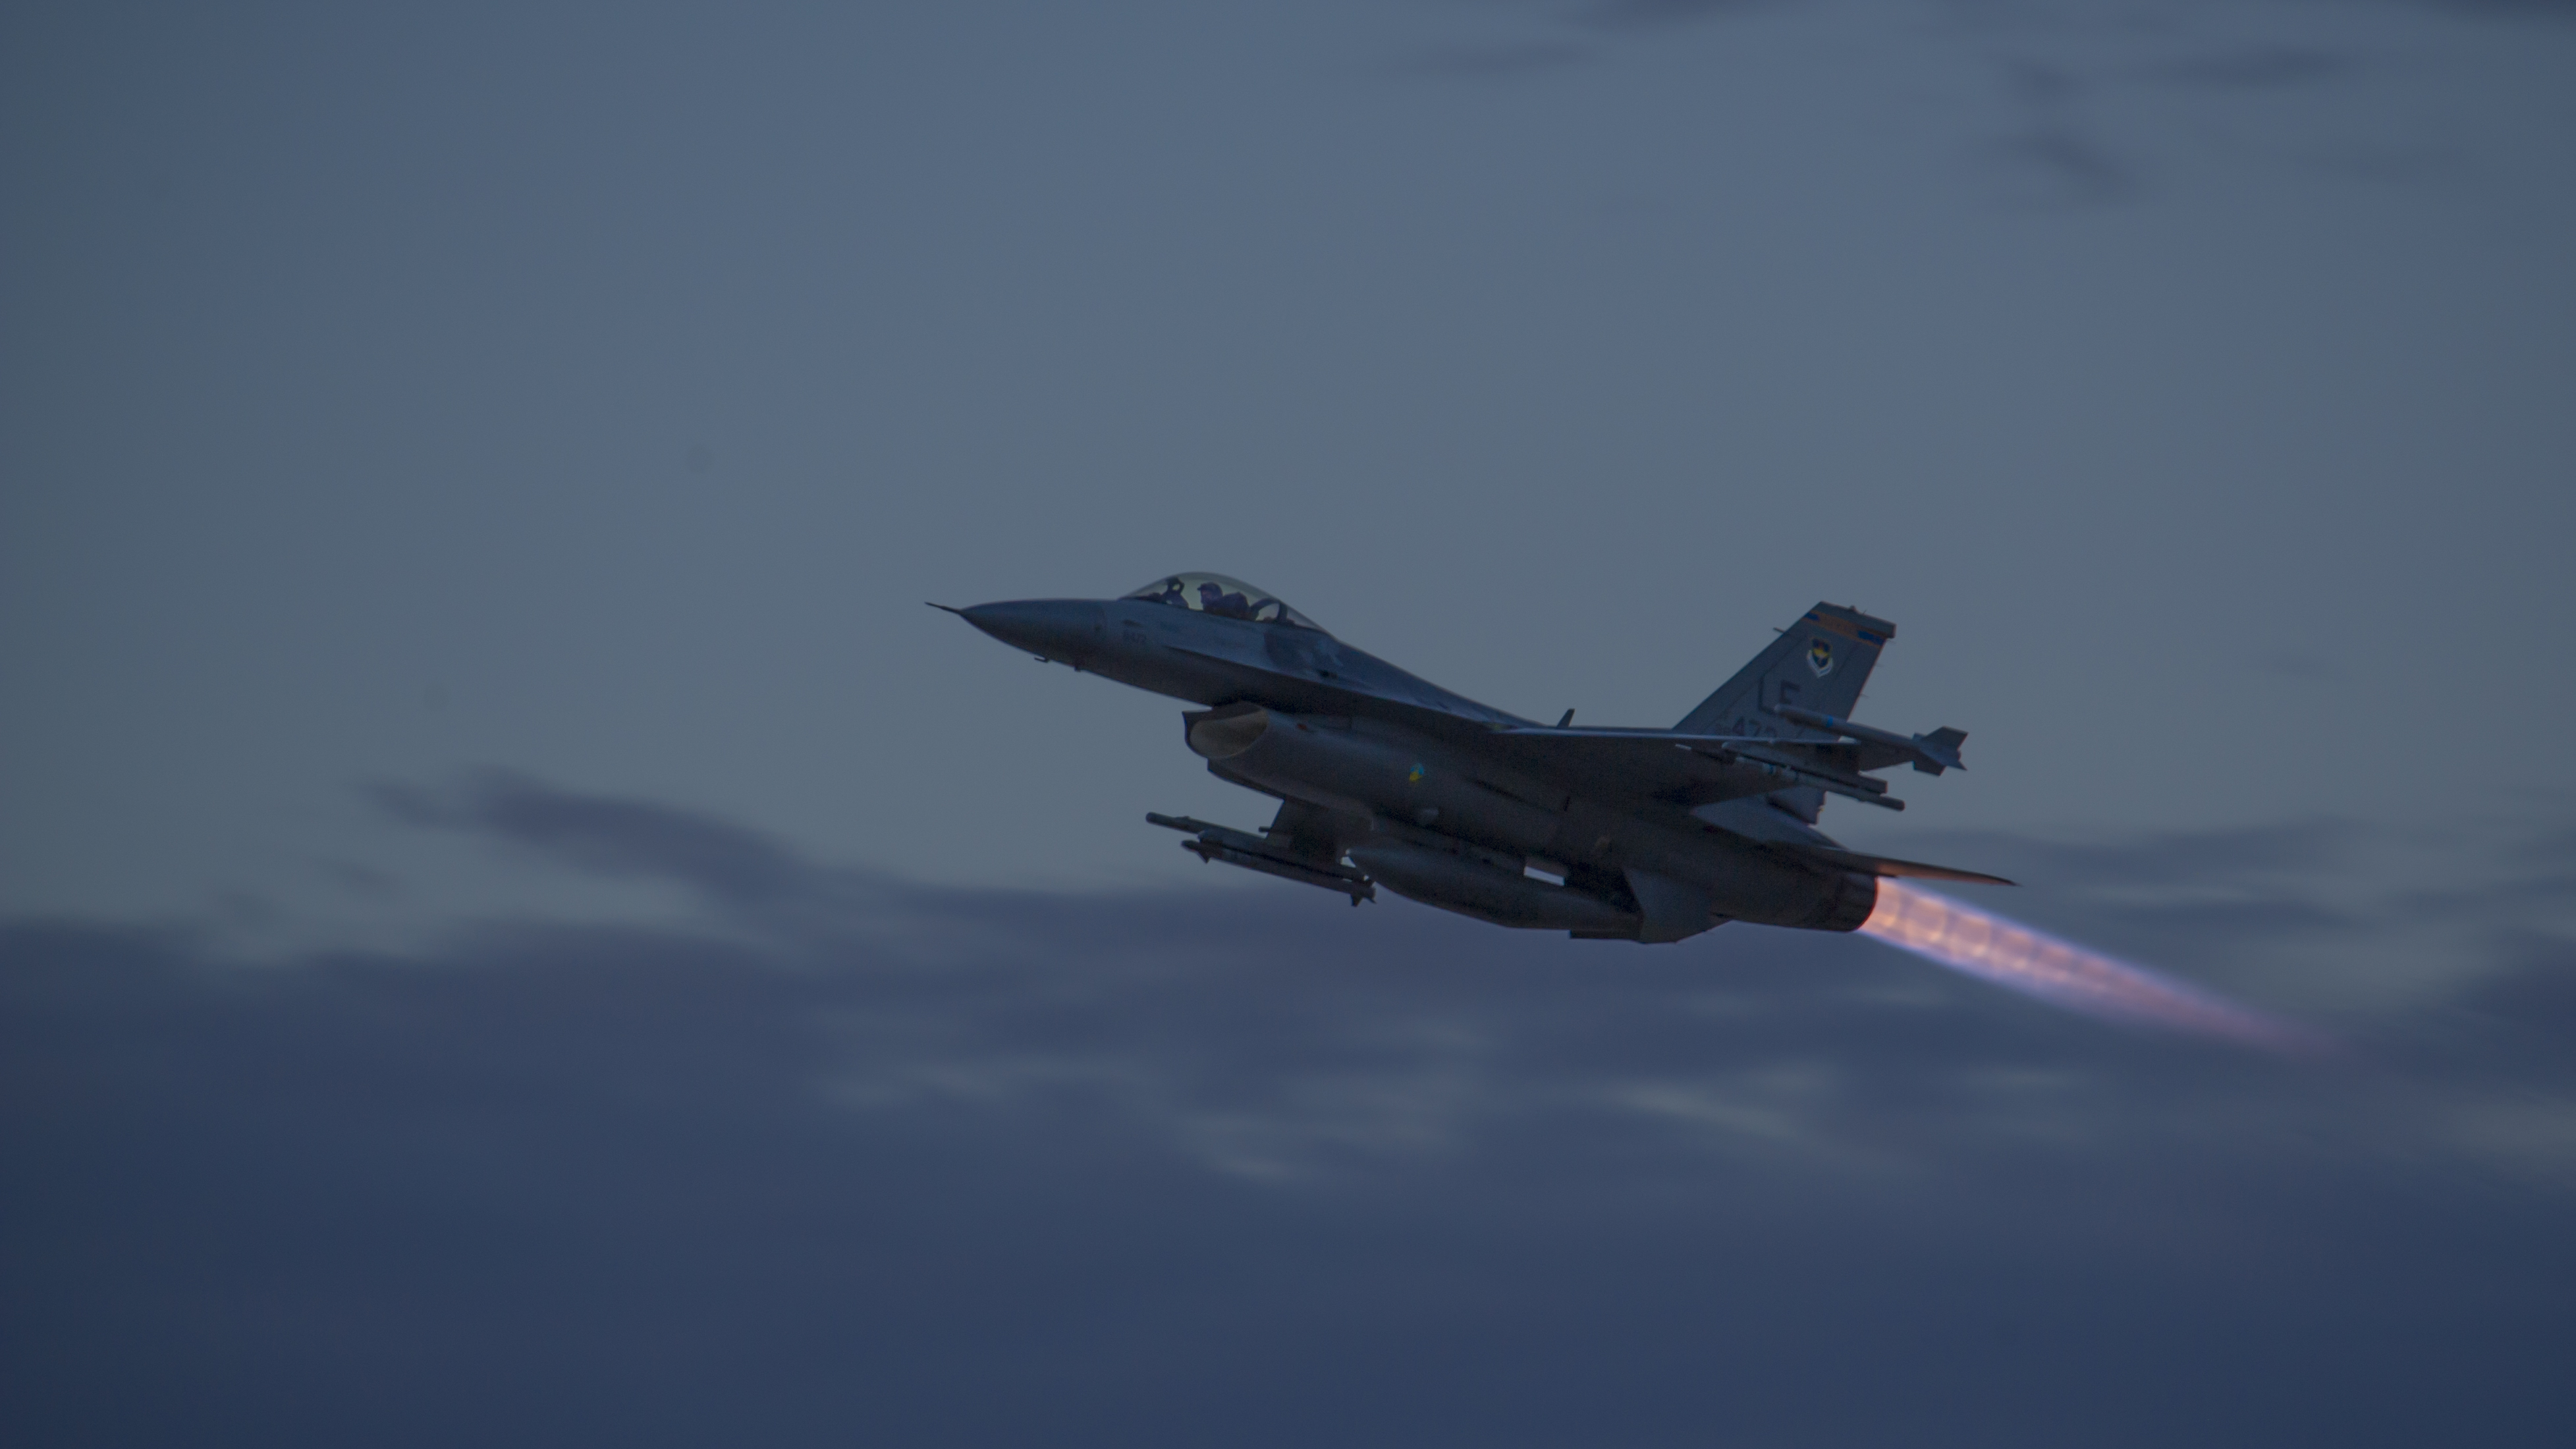 General 3911x2200 airplane military aircraft US Air Force General Dynamics F-16 Fighting Falcon jet fighter twilight evening afterburner General Dynamics American aircraft dusk